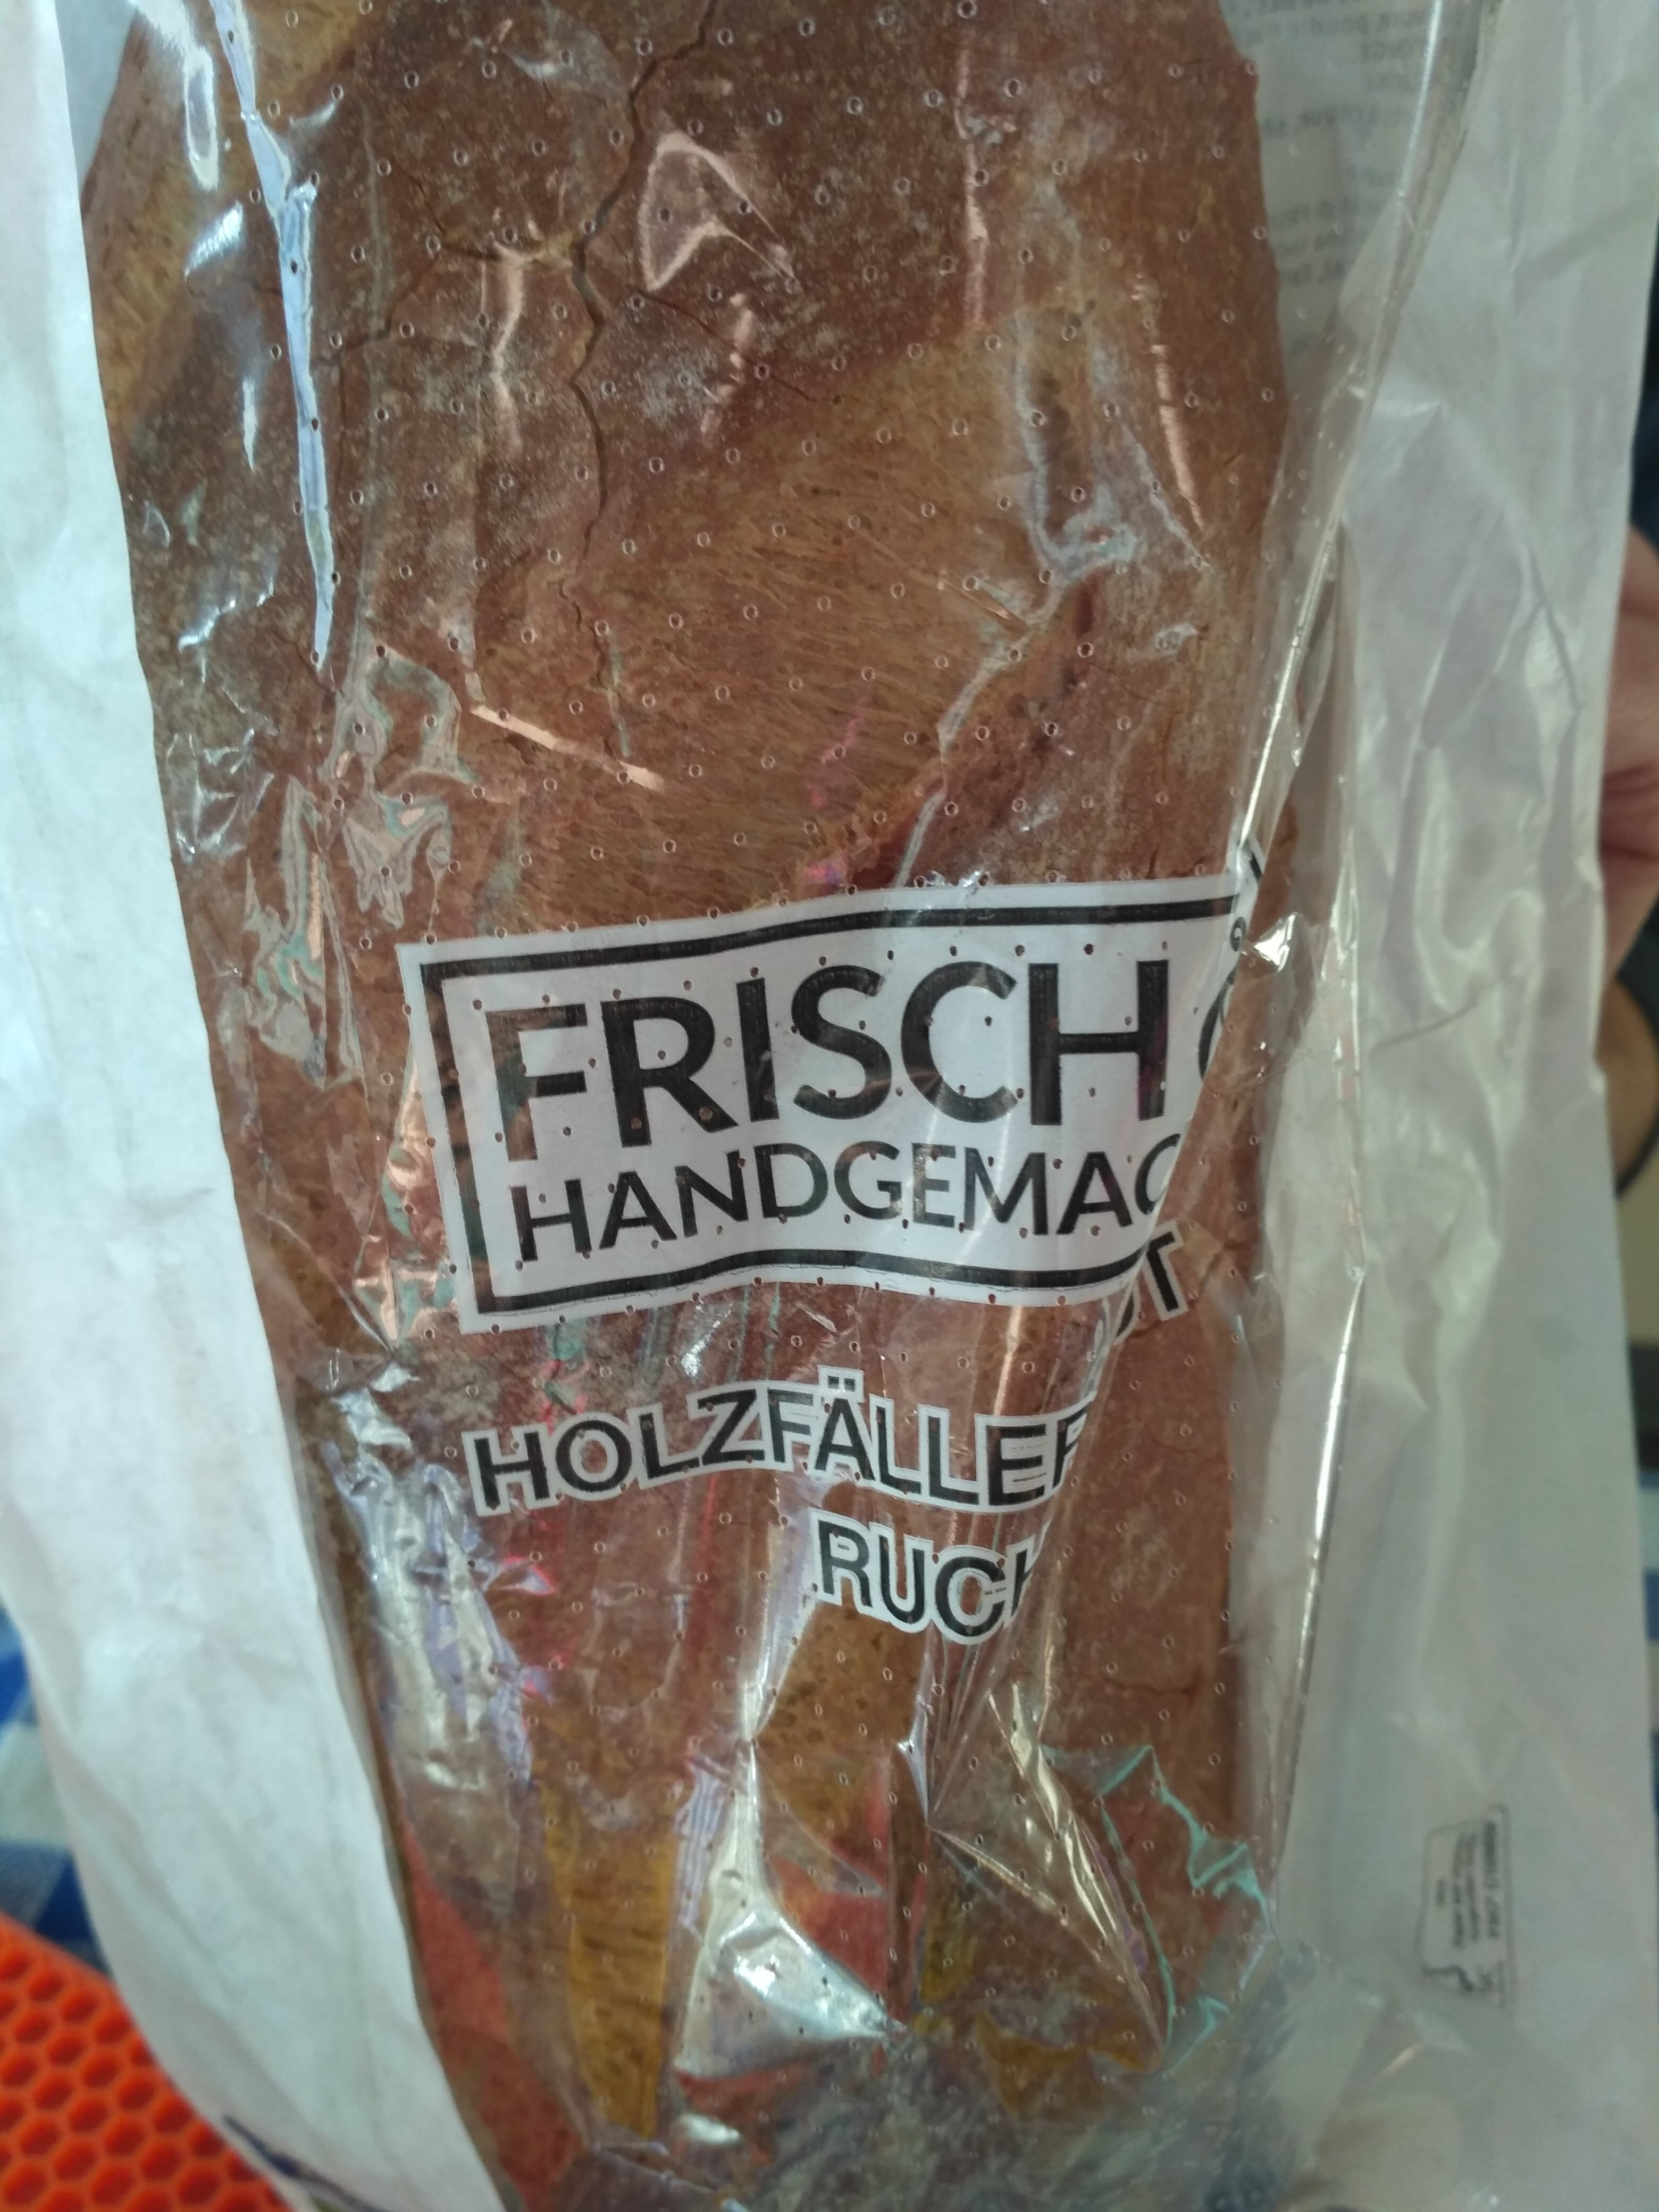 Holzfällerbrot Ruch - Prodotto